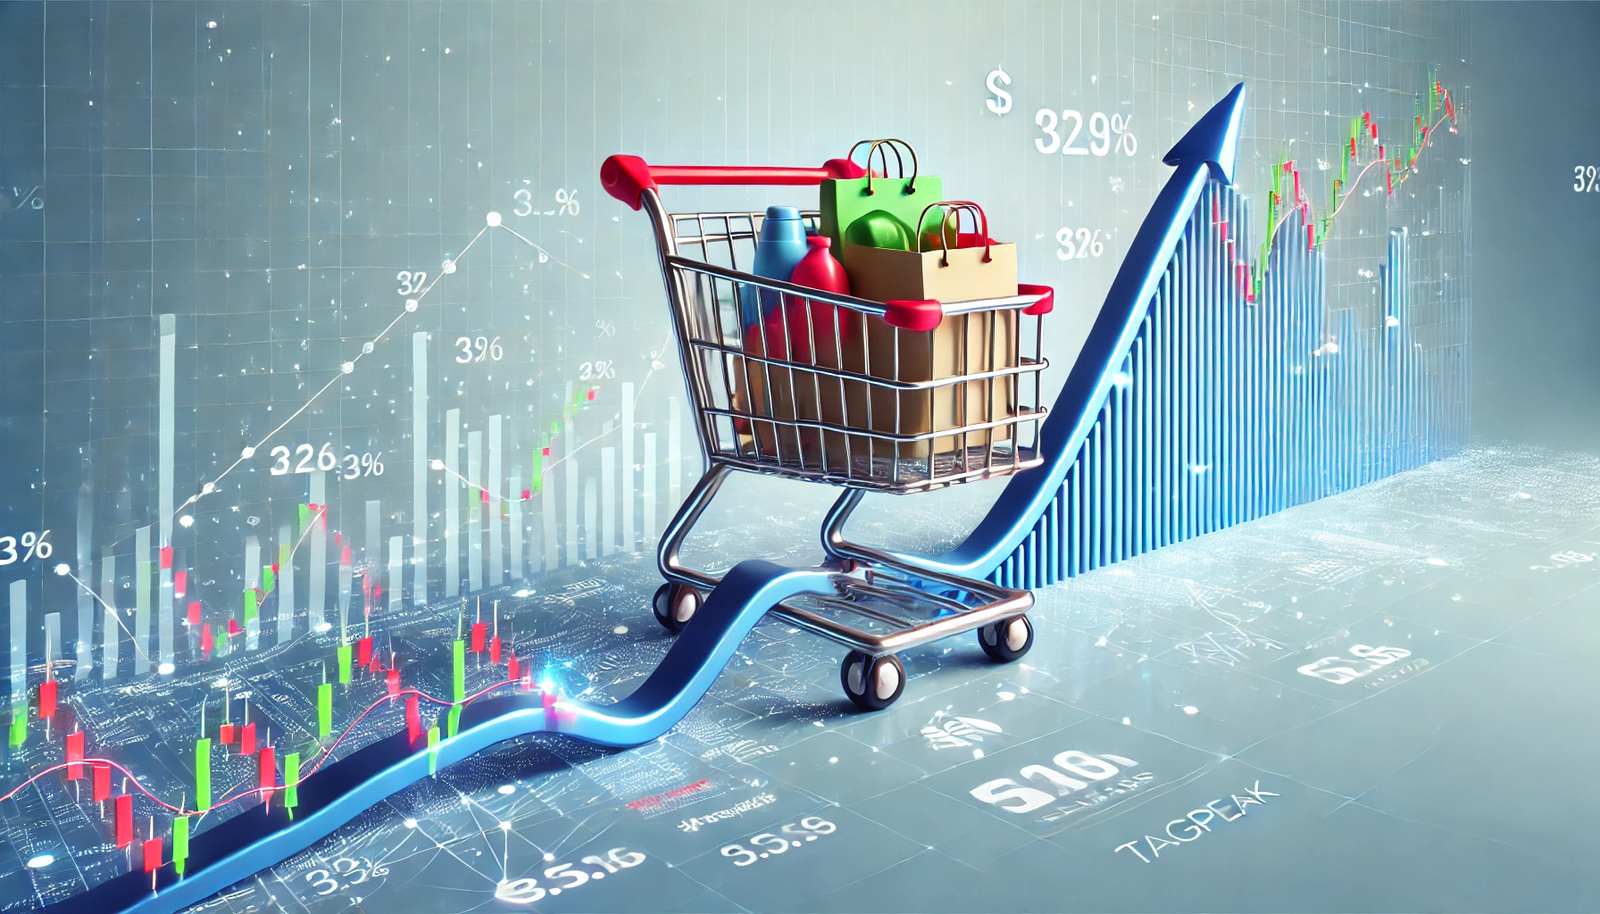 Investing is important - Link your shopping to the financial markets